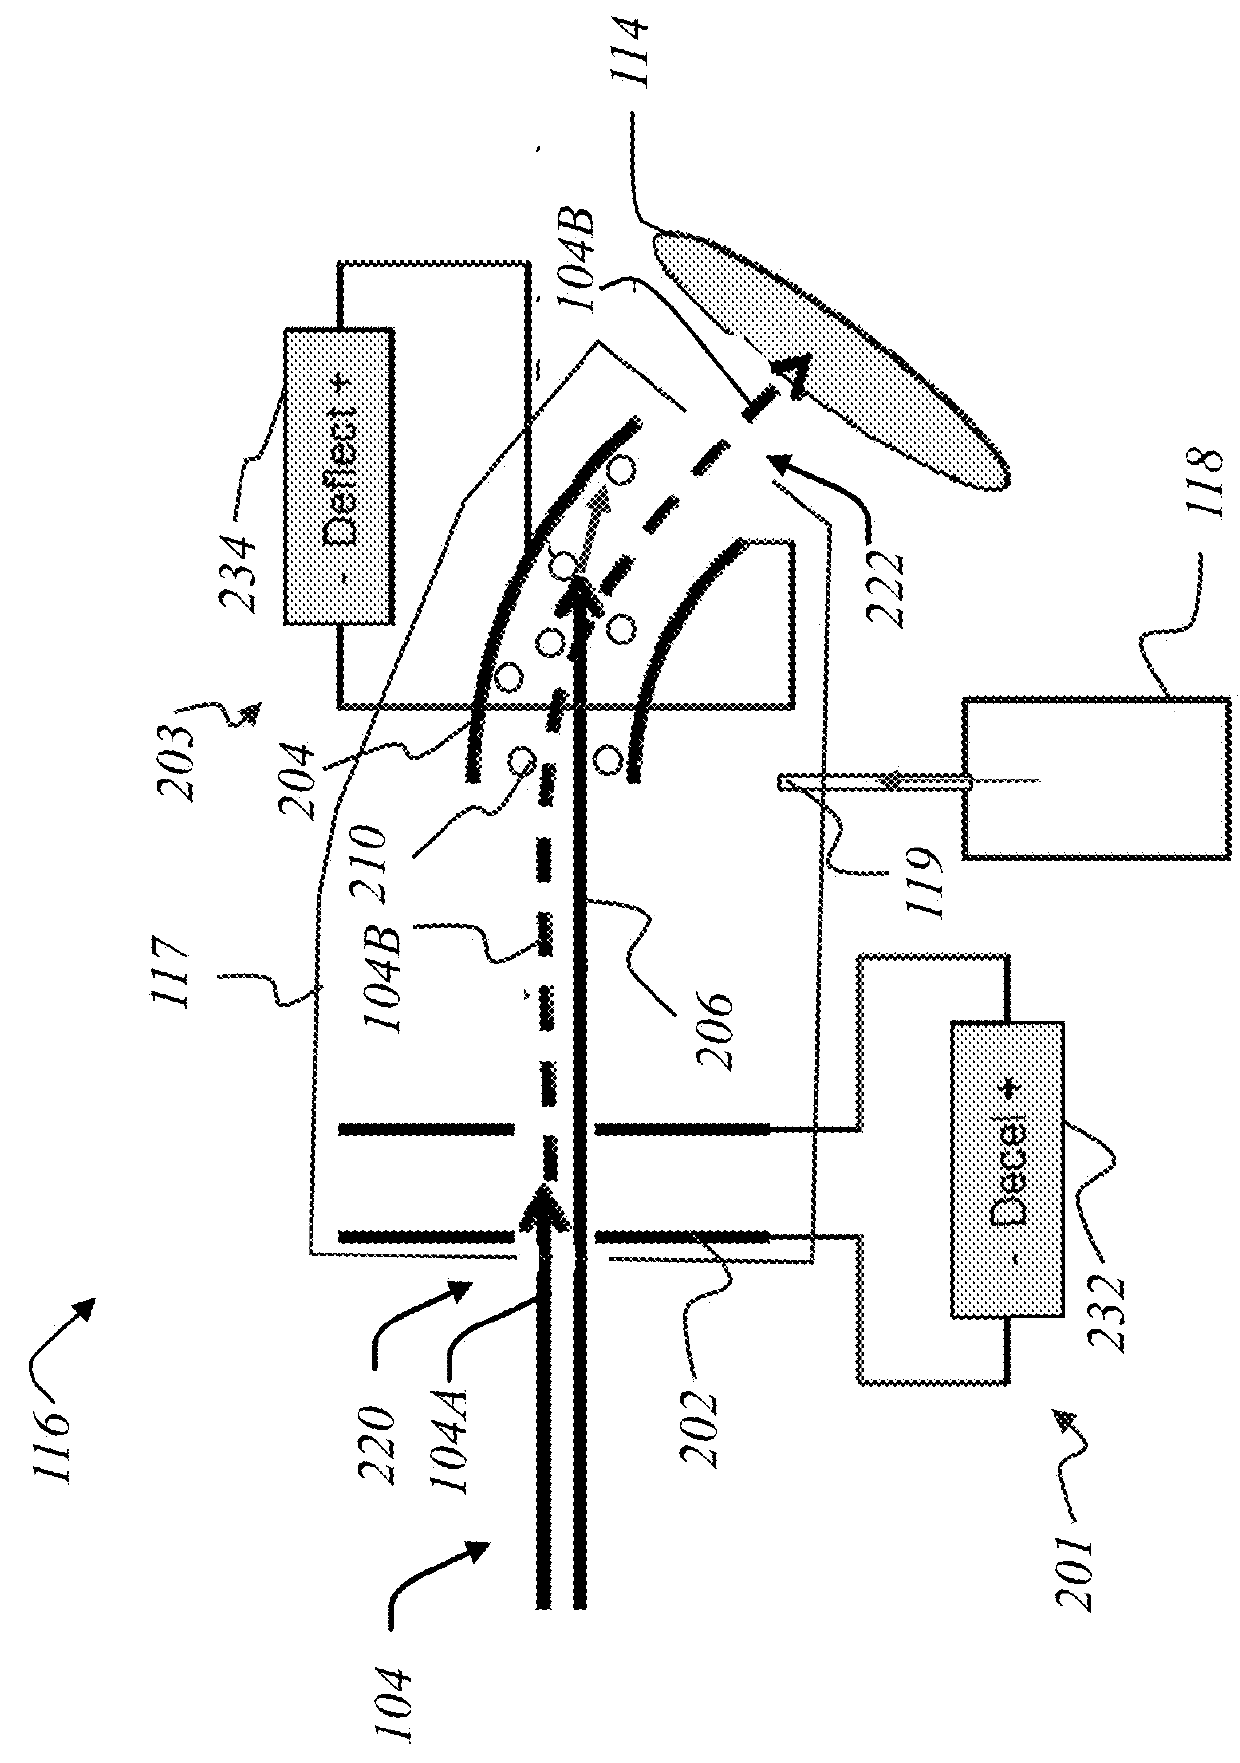 Apparatus and techniques for decelerated ion beam with no energy contamination